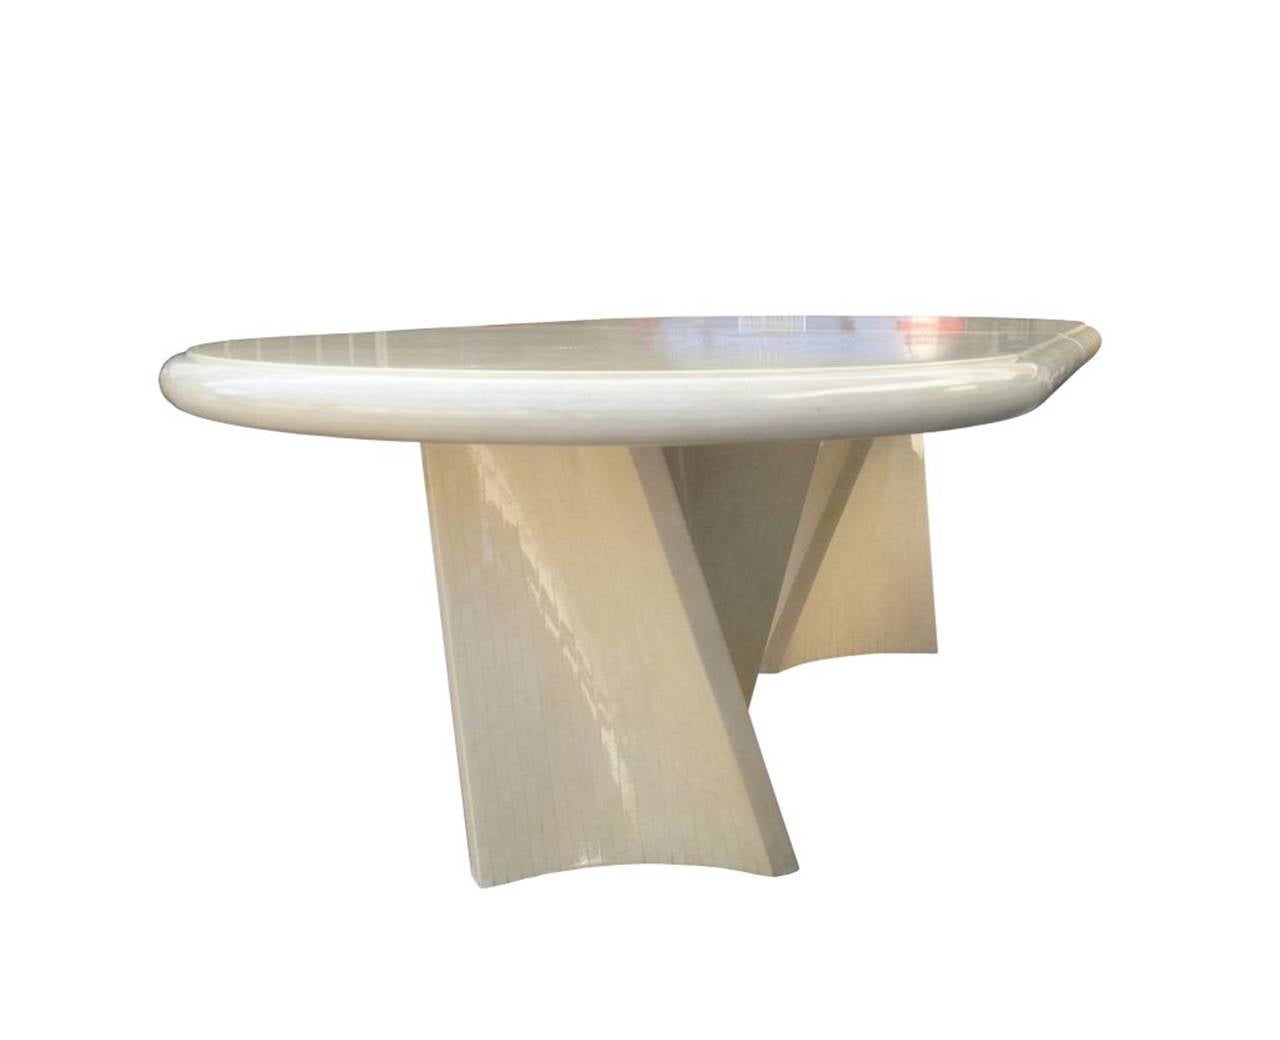 A stunning dining table made of bone tiles with a heavy lacquer. The sculptural form is very elegant as well as the bull nose edge.
The architectural lines of the pedestals are truly stunning and give the table a very modern and chic